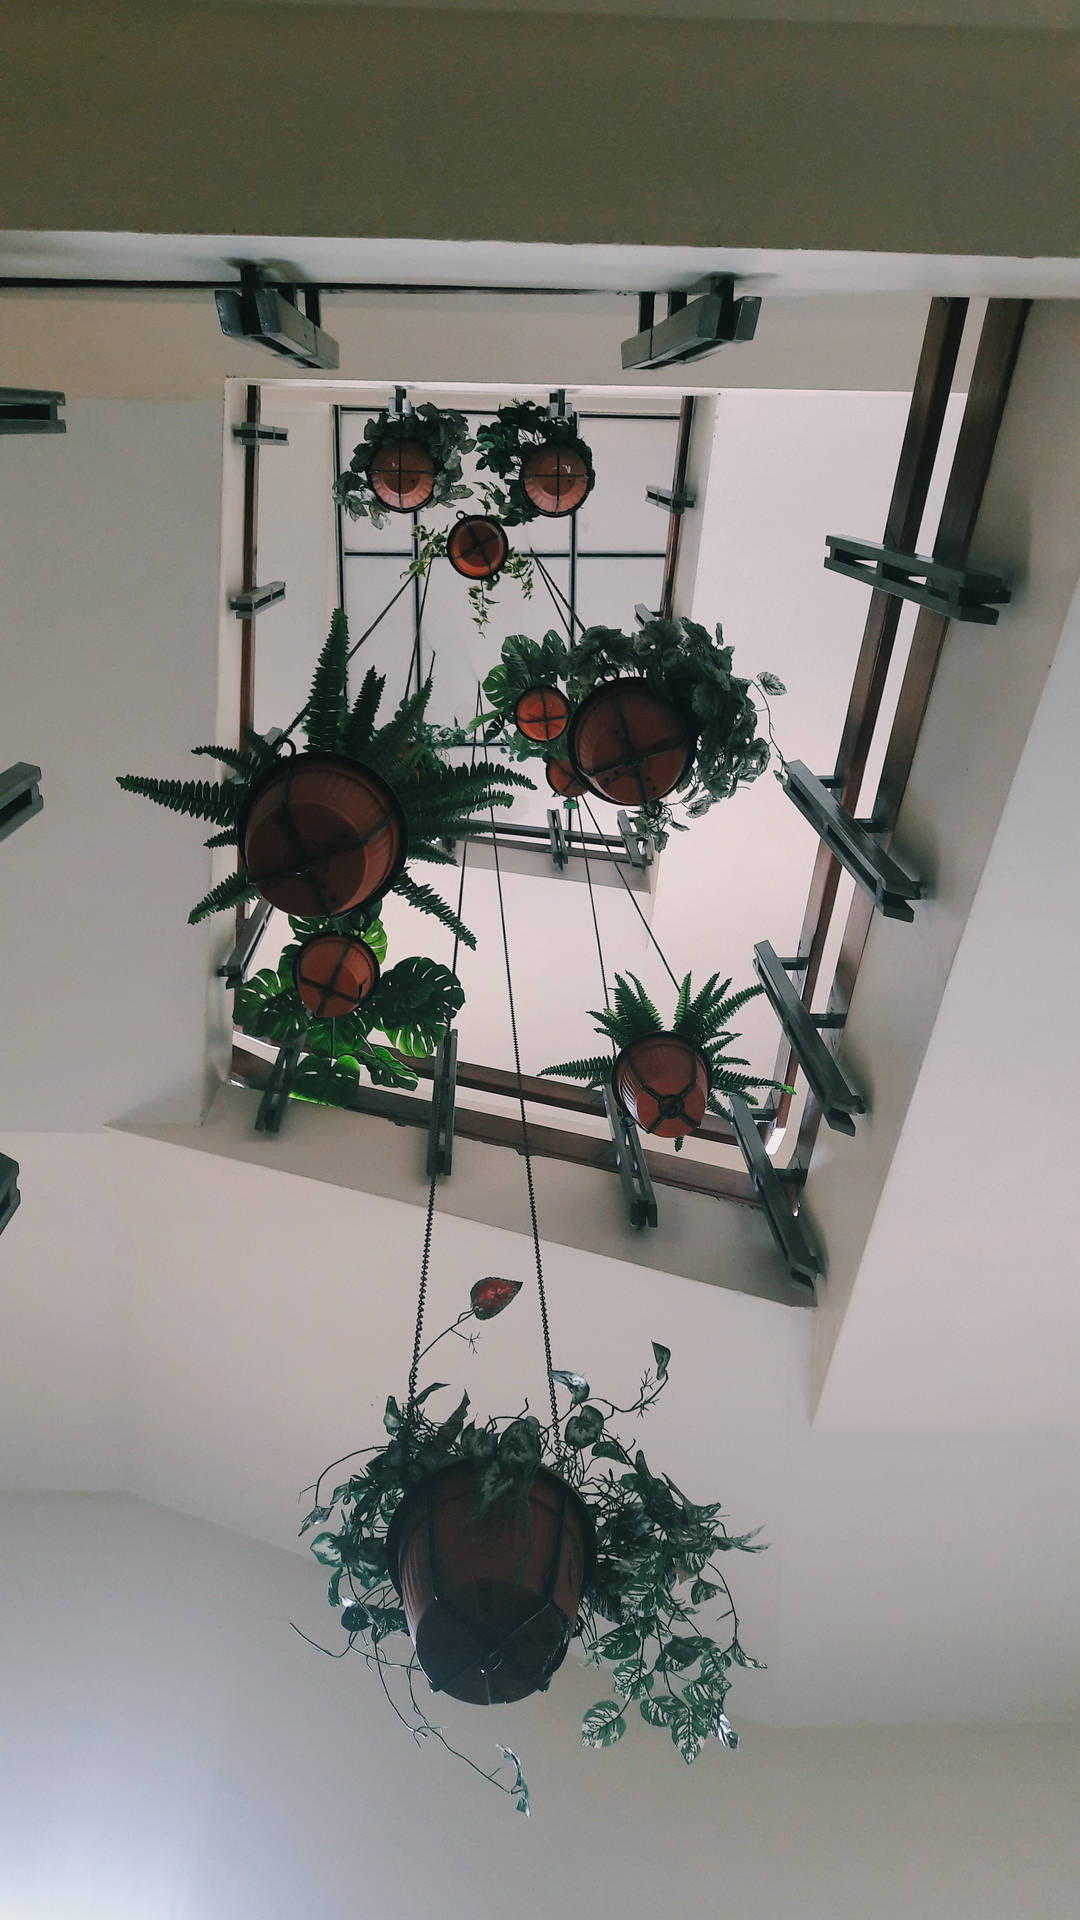 Aesthetic wallpaper of potted green plants hanging on the ceiling.  